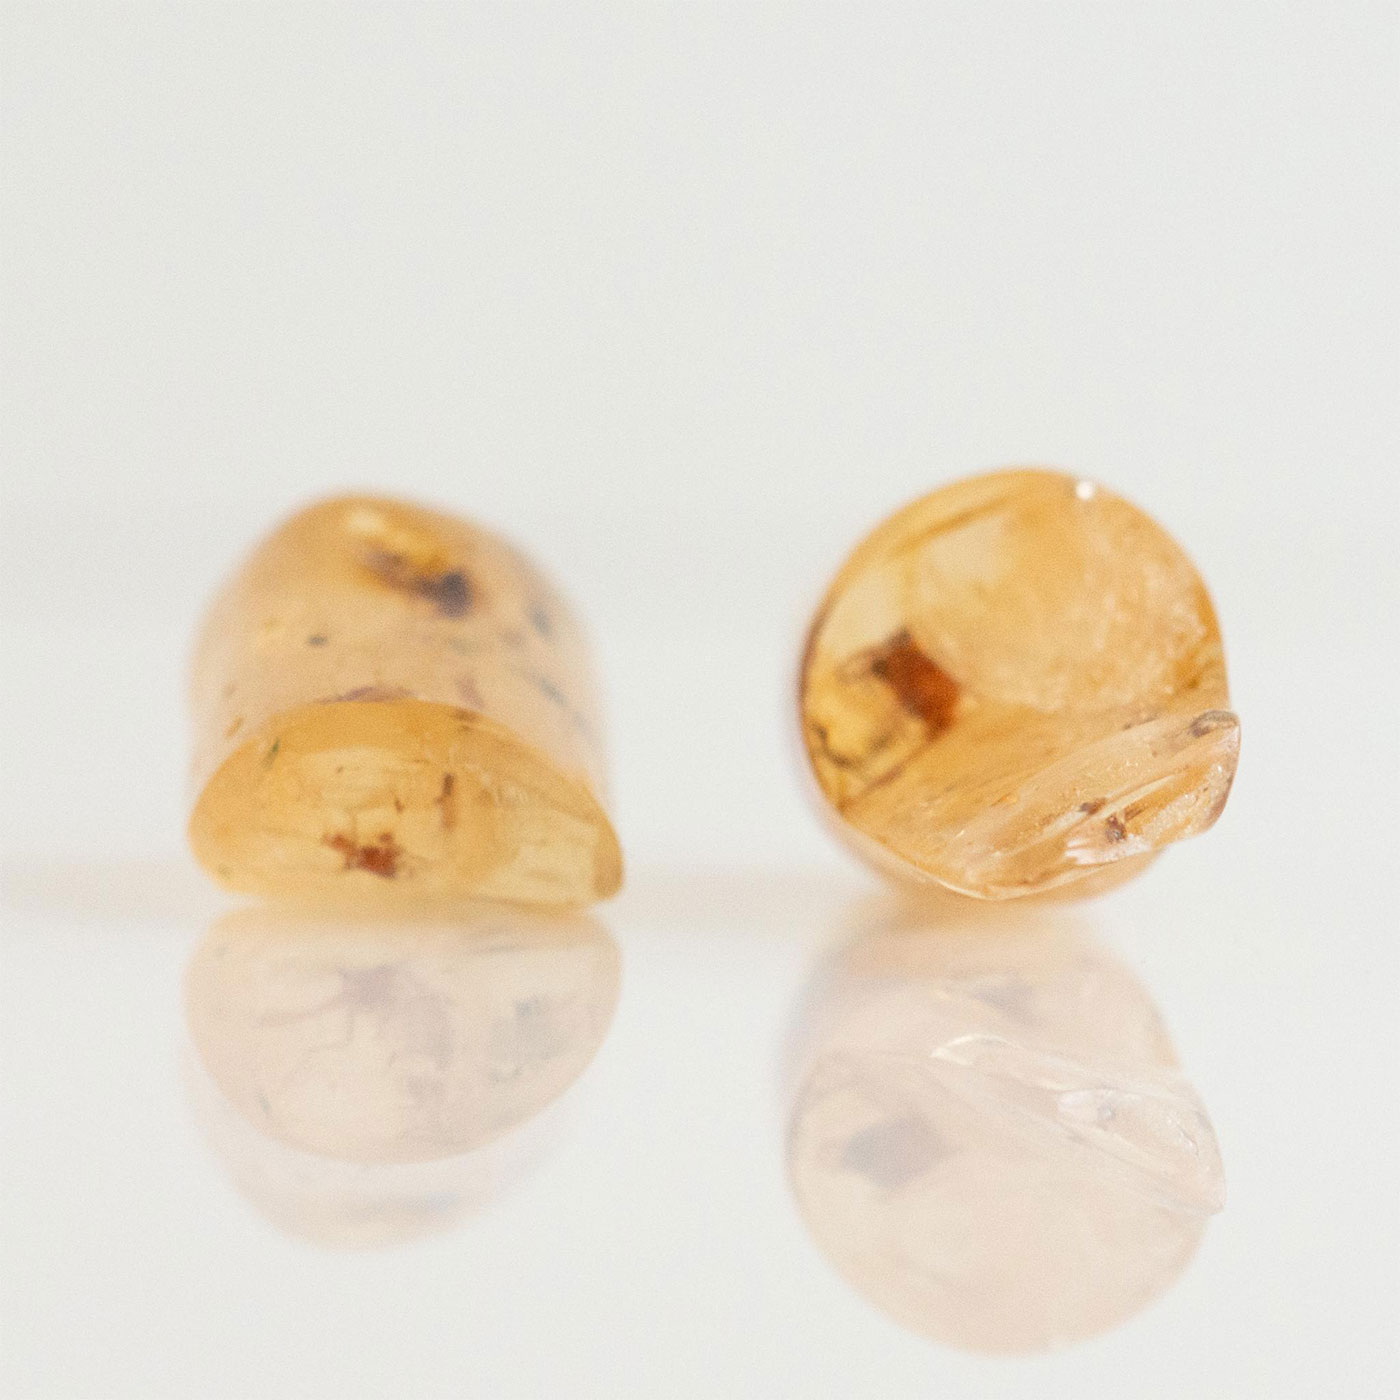 2 POLISHED LIGHT HONEY COPAL AMBER RODS W. MANY INSECTS - Image 4 of 8